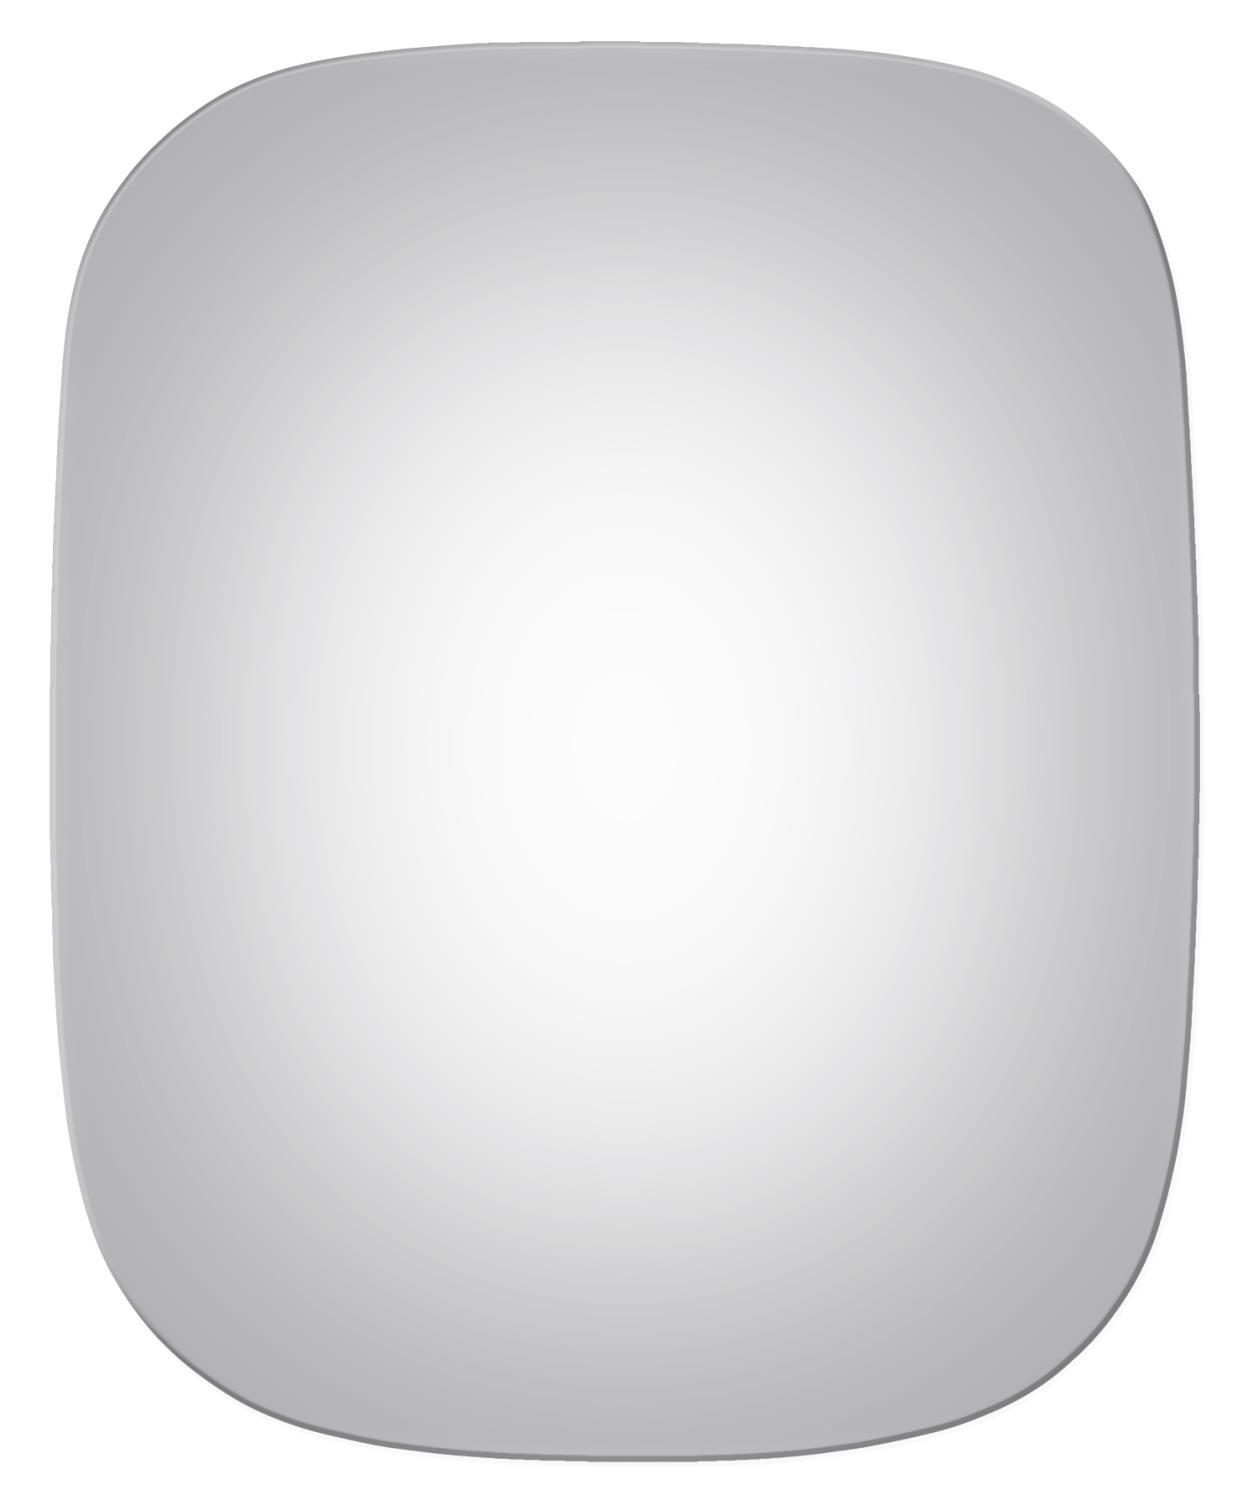 2718 SIDE VIEW MIRROR